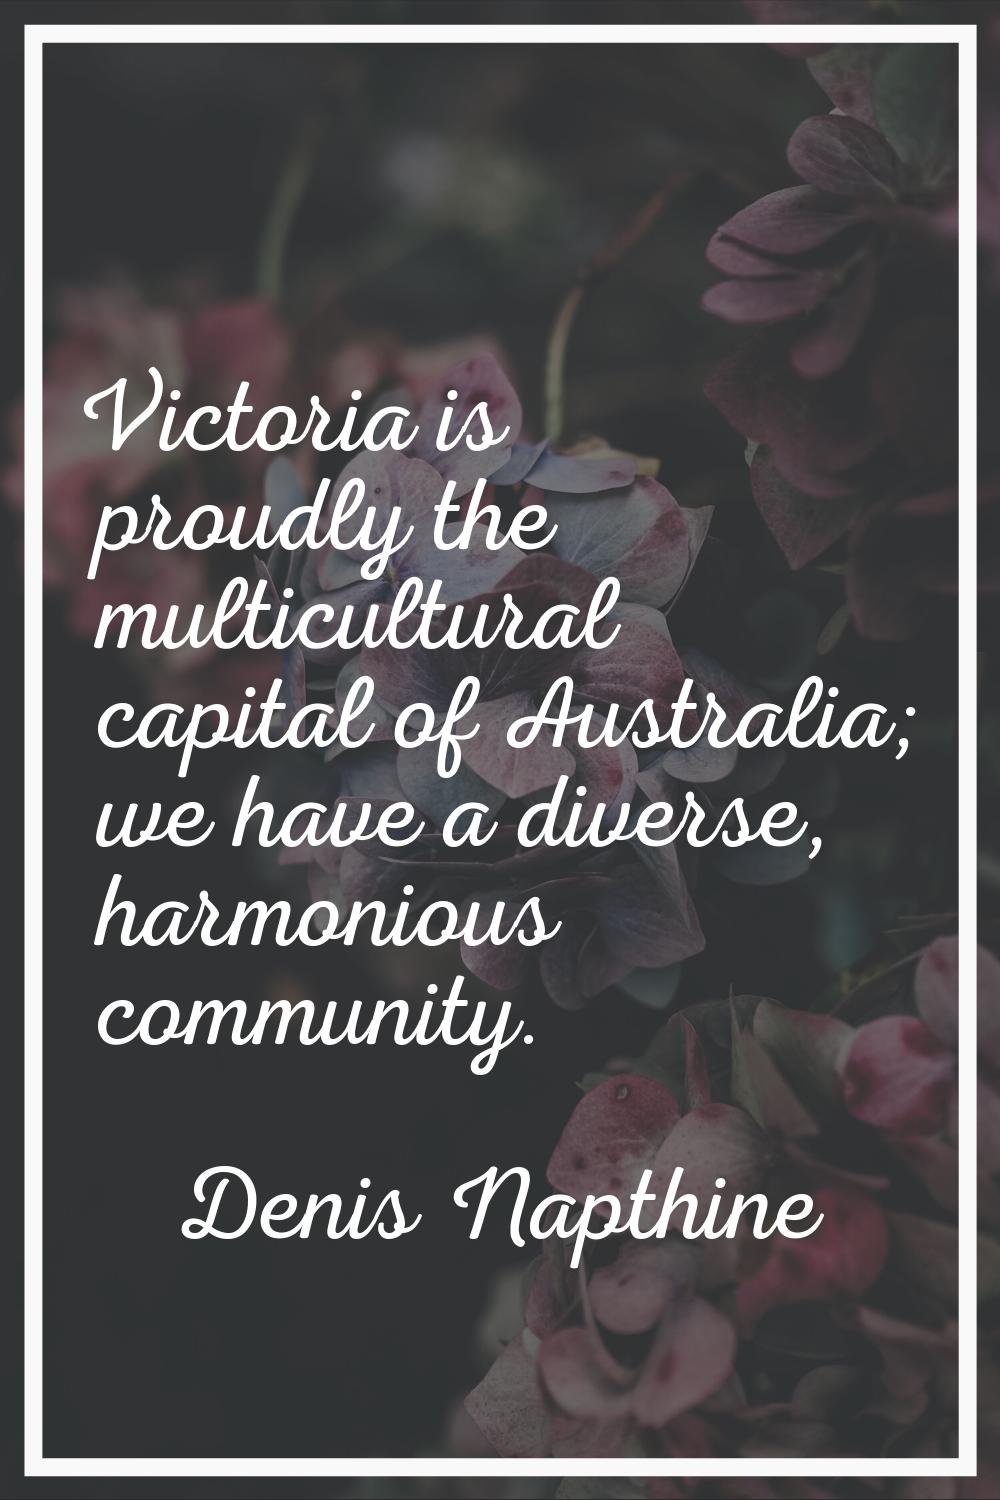 Victoria is proudly the multicultural capital of Australia; we have a diverse, harmonious community